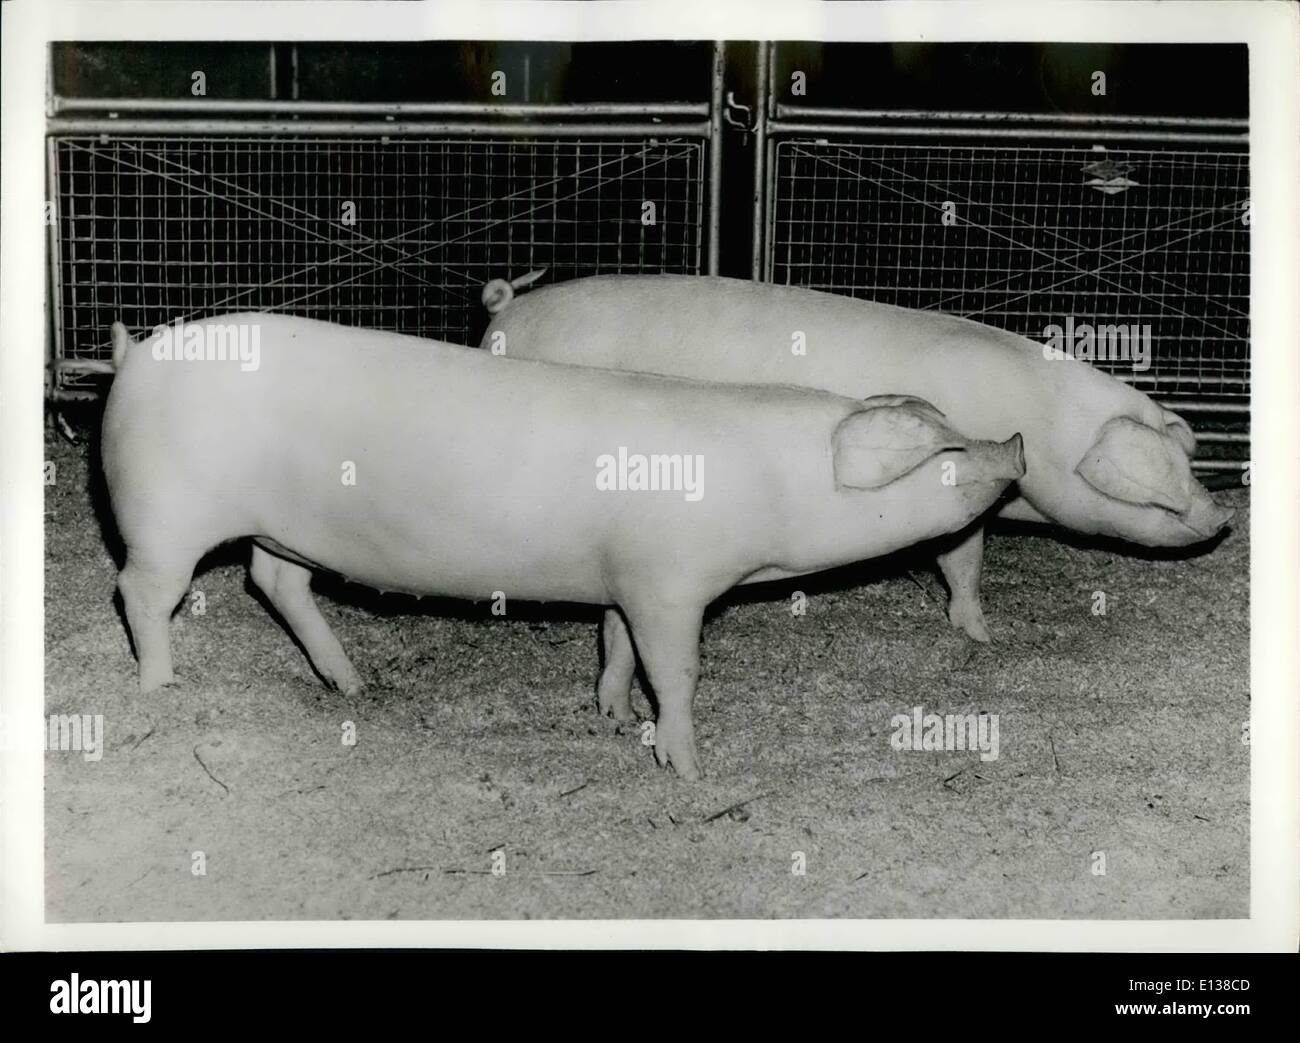 Feb. 29, 2012 - WINNERS BY A LENGTH. Described as having , fine length for their age and exceptionally good hams pair of August born Walsh gilts won the supreme award for the beet pen of two pigs at the recent Smithfield Show held In London Picture Shows One of the winning pair takes full advantage of her length for the camera at the Smithfield Show. They are bred and owned by two young brothers, G.N. and B.S. Barrett of Cambridgeshire, England Stock Photo